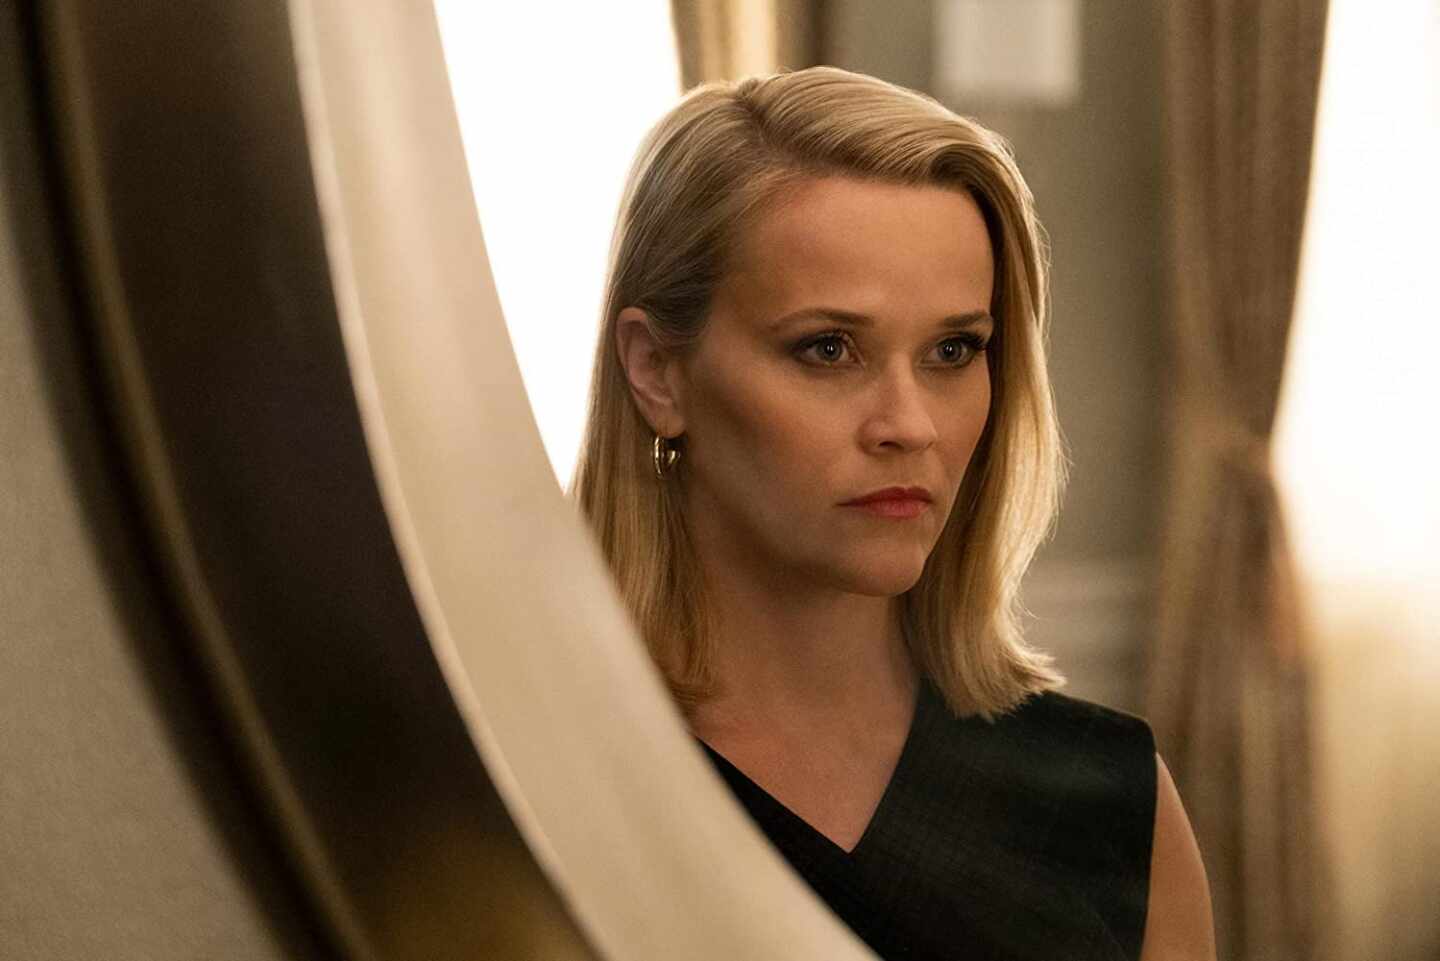 'Little fires everywhere' de Reese Witherspoon llega a Amazon el 22 de mayo